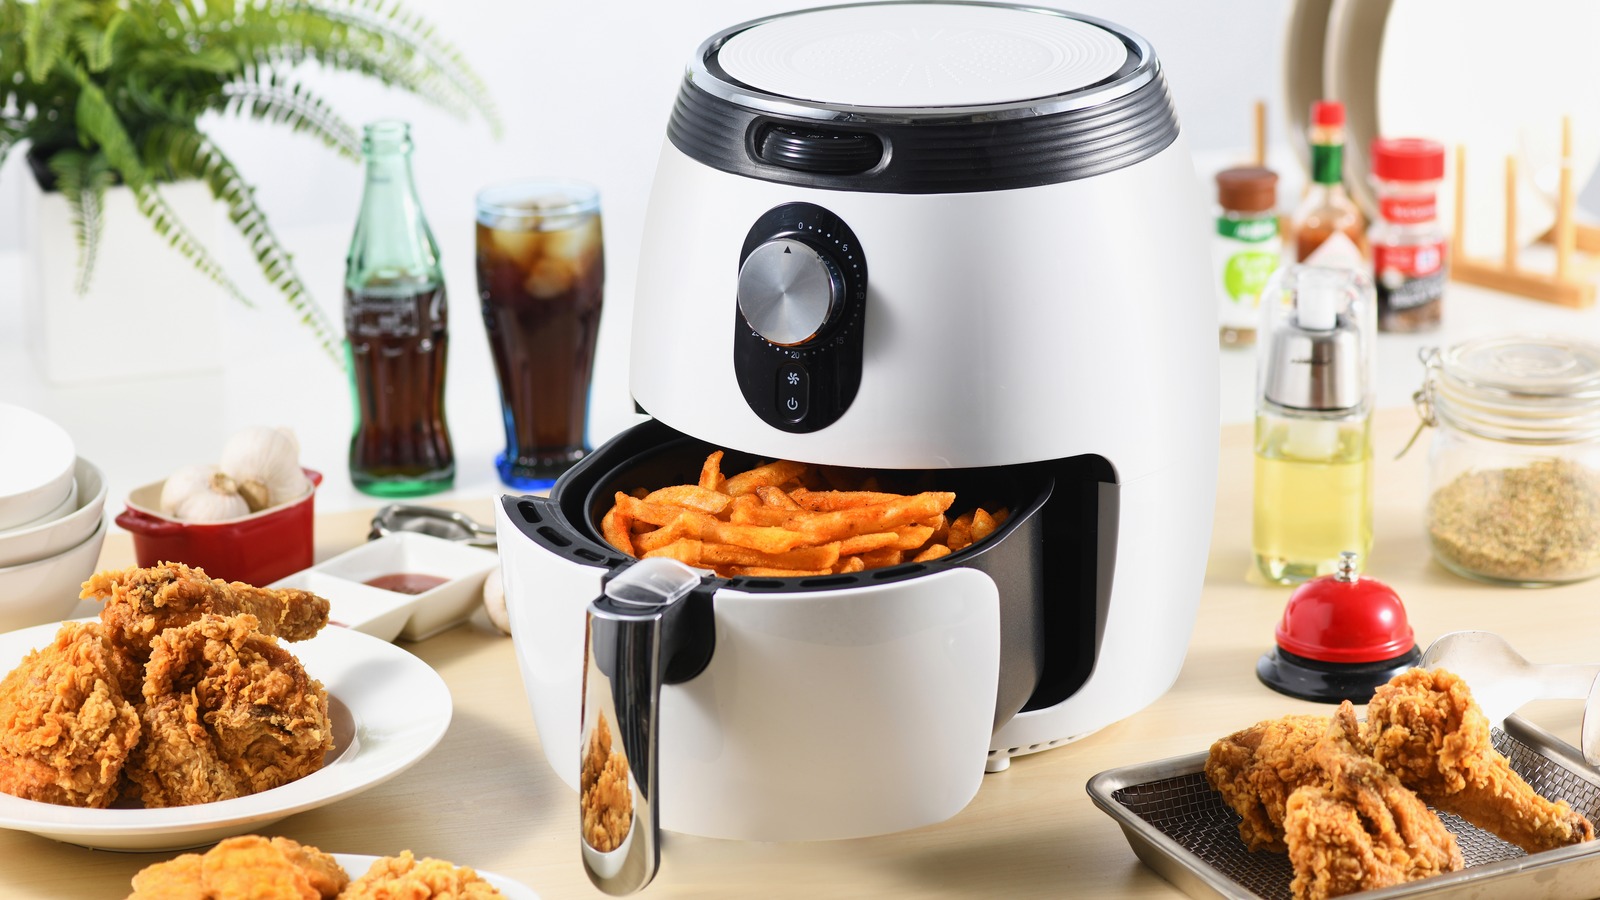 https://www.tastingtable.com/img/gallery/how-to-convert-oven-cooking-times-for-the-air-fryer/l-intro-1692095840.jpg